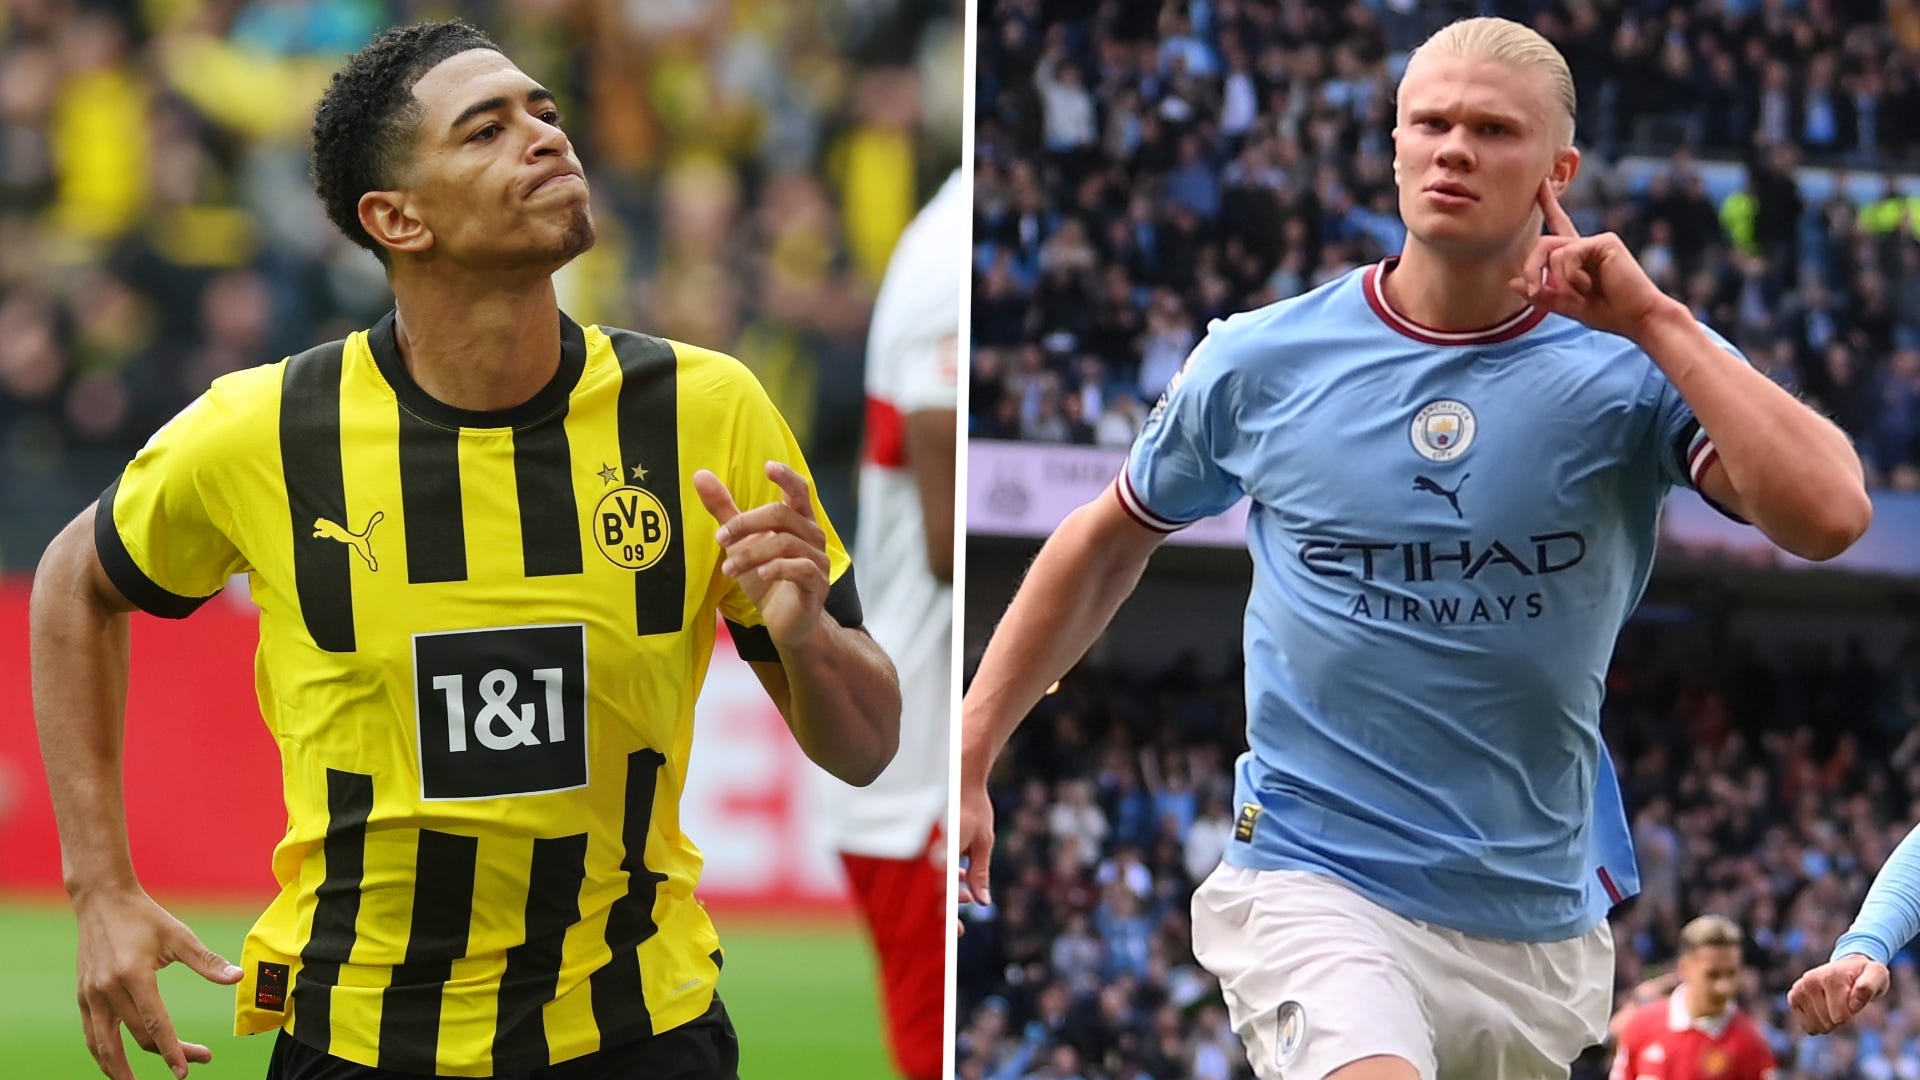 Borussia Dortmund vs Man City Live stream, TV channel, kick-off time and where to watch Goal India